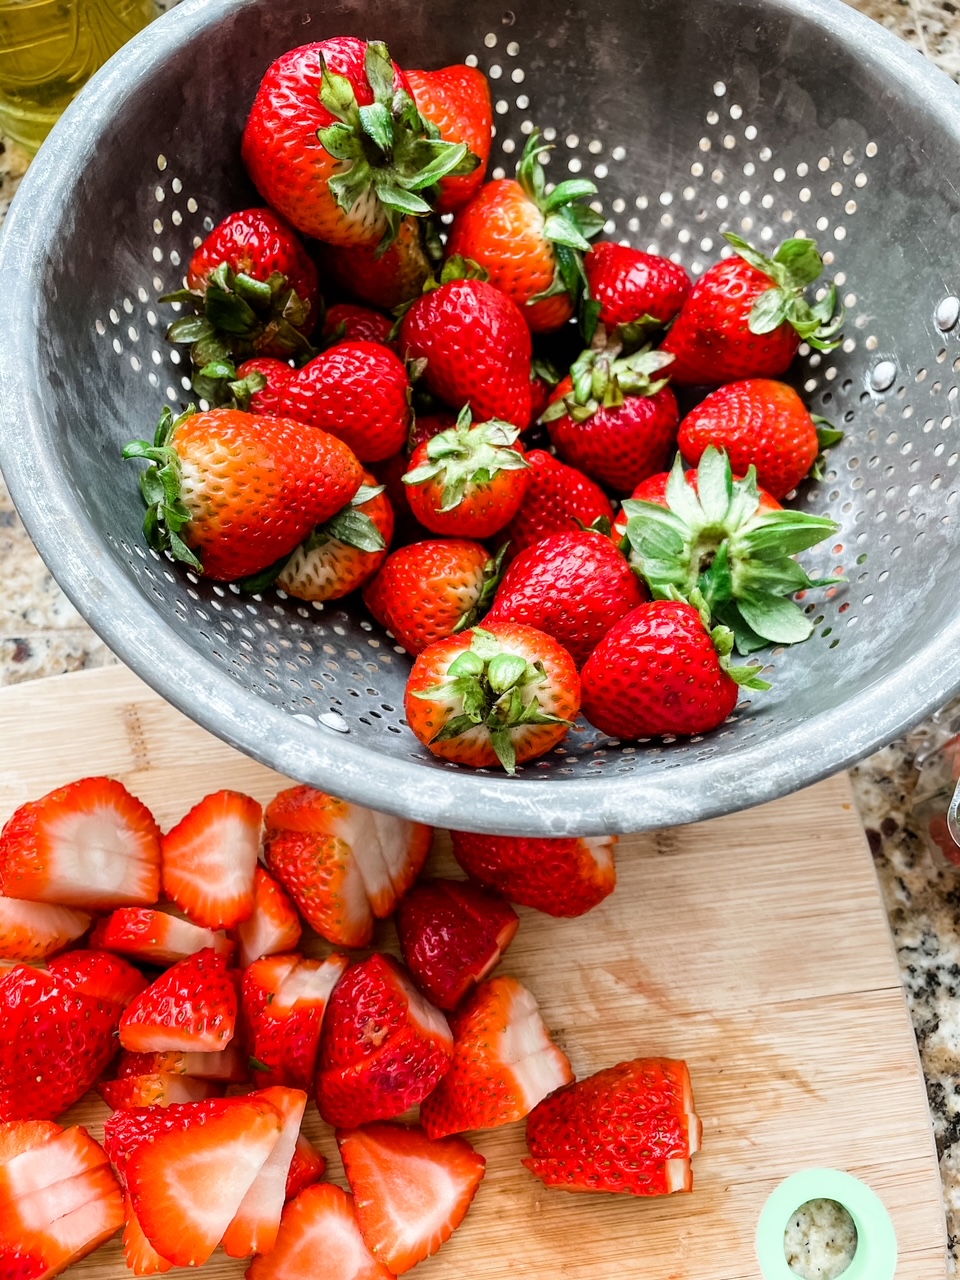 Fresh strawberries, both sliced and in a colander